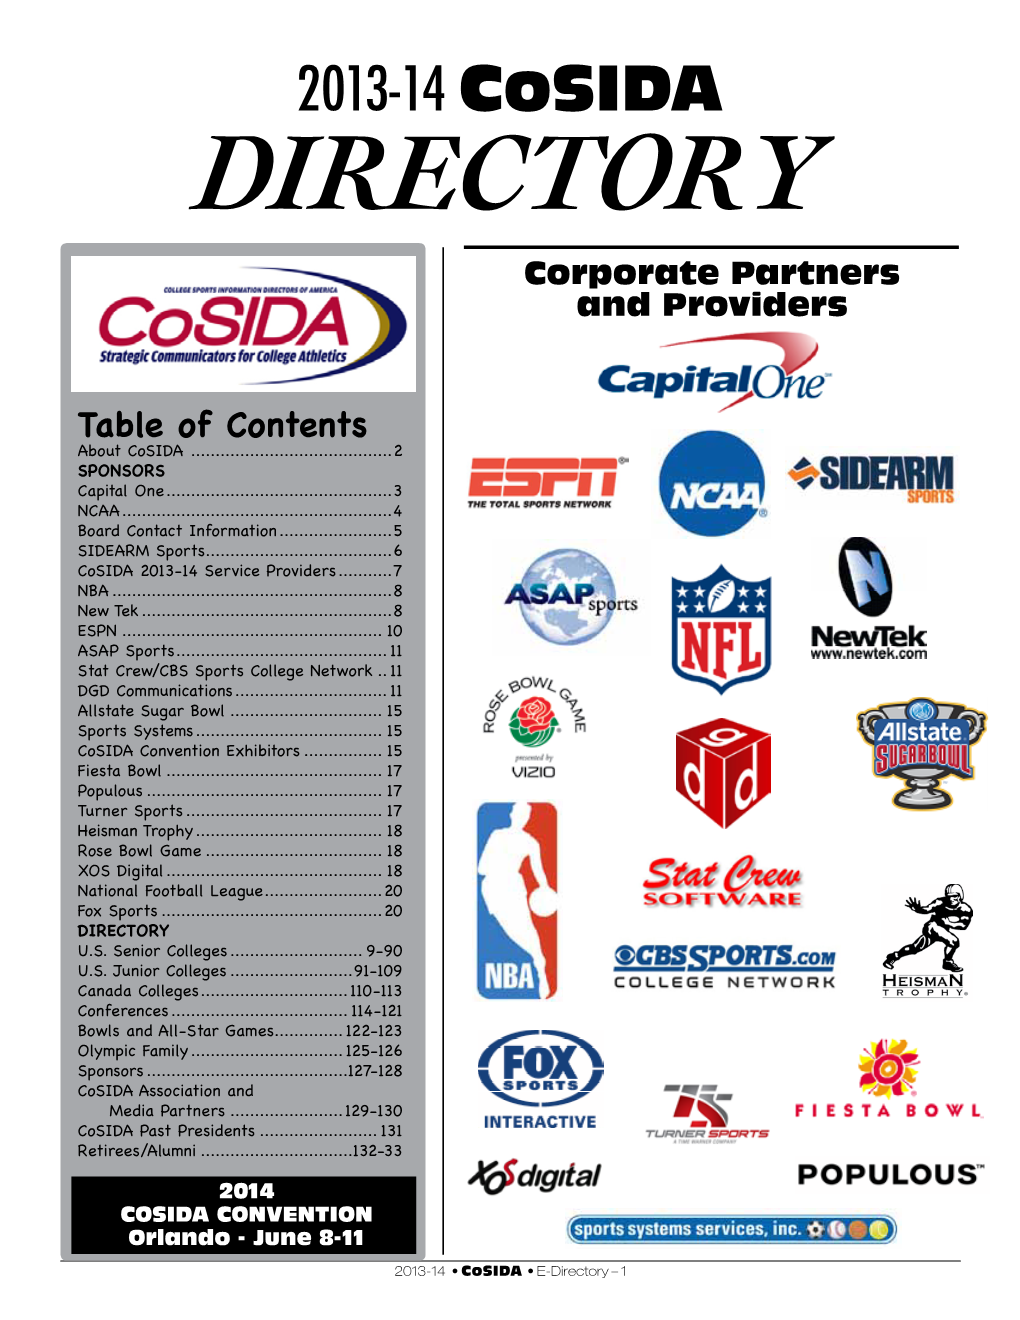 DIRECTORY Corporate Partners and Providers